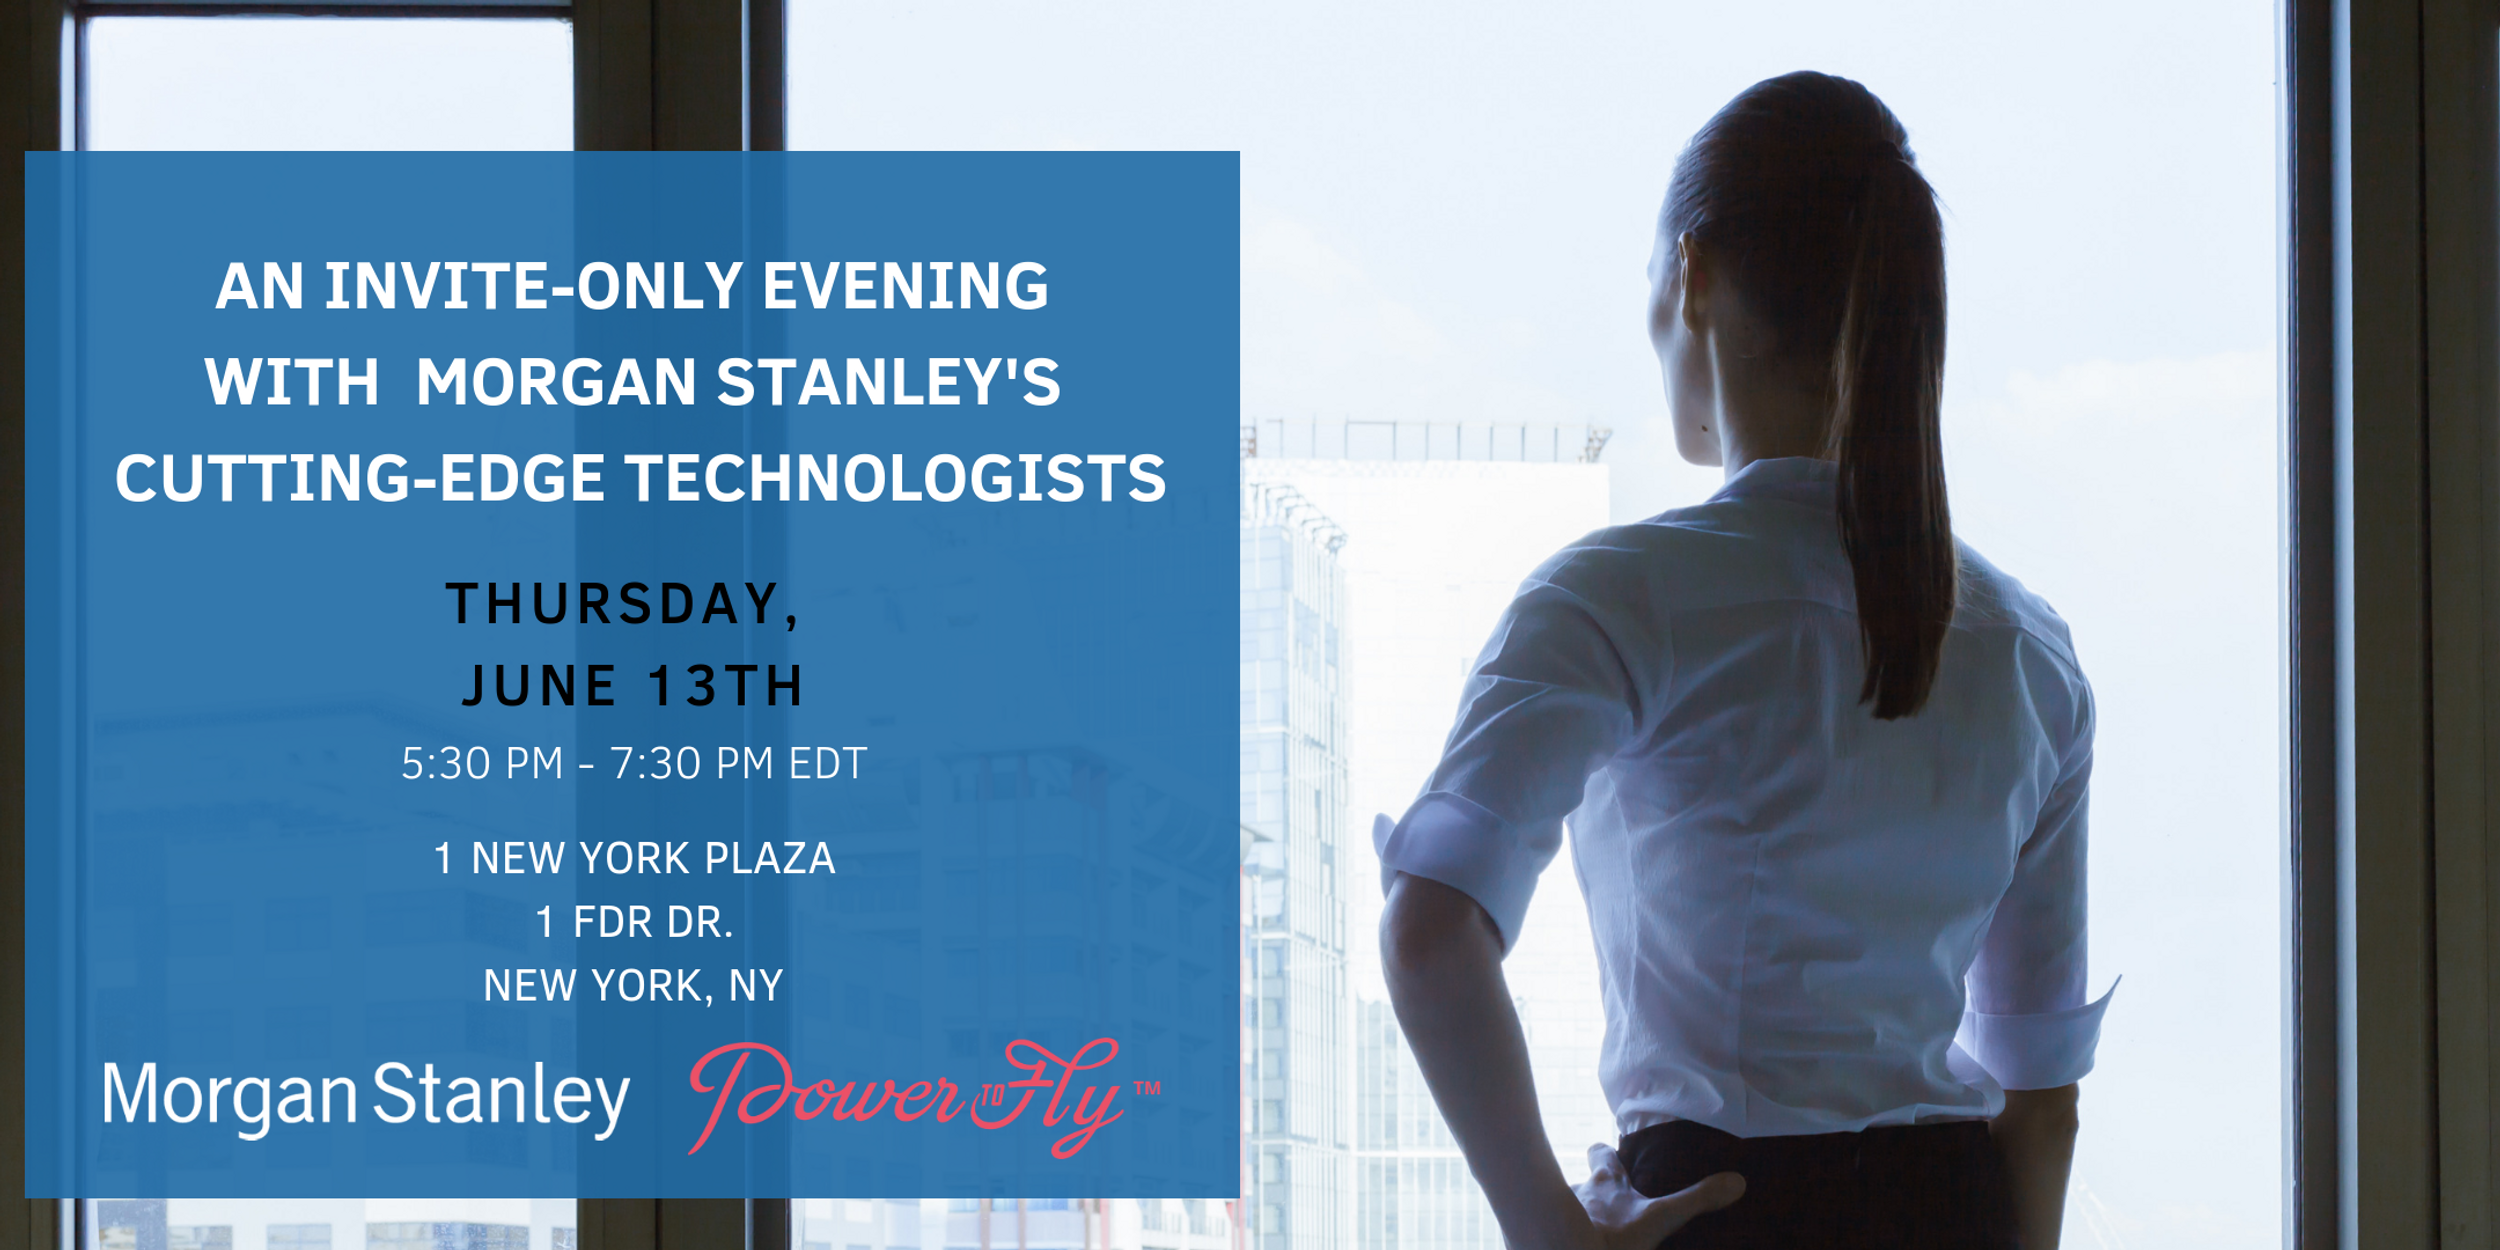 An Invite-Only Evening with Morgan Stanley's Cutting-Edge Technologists